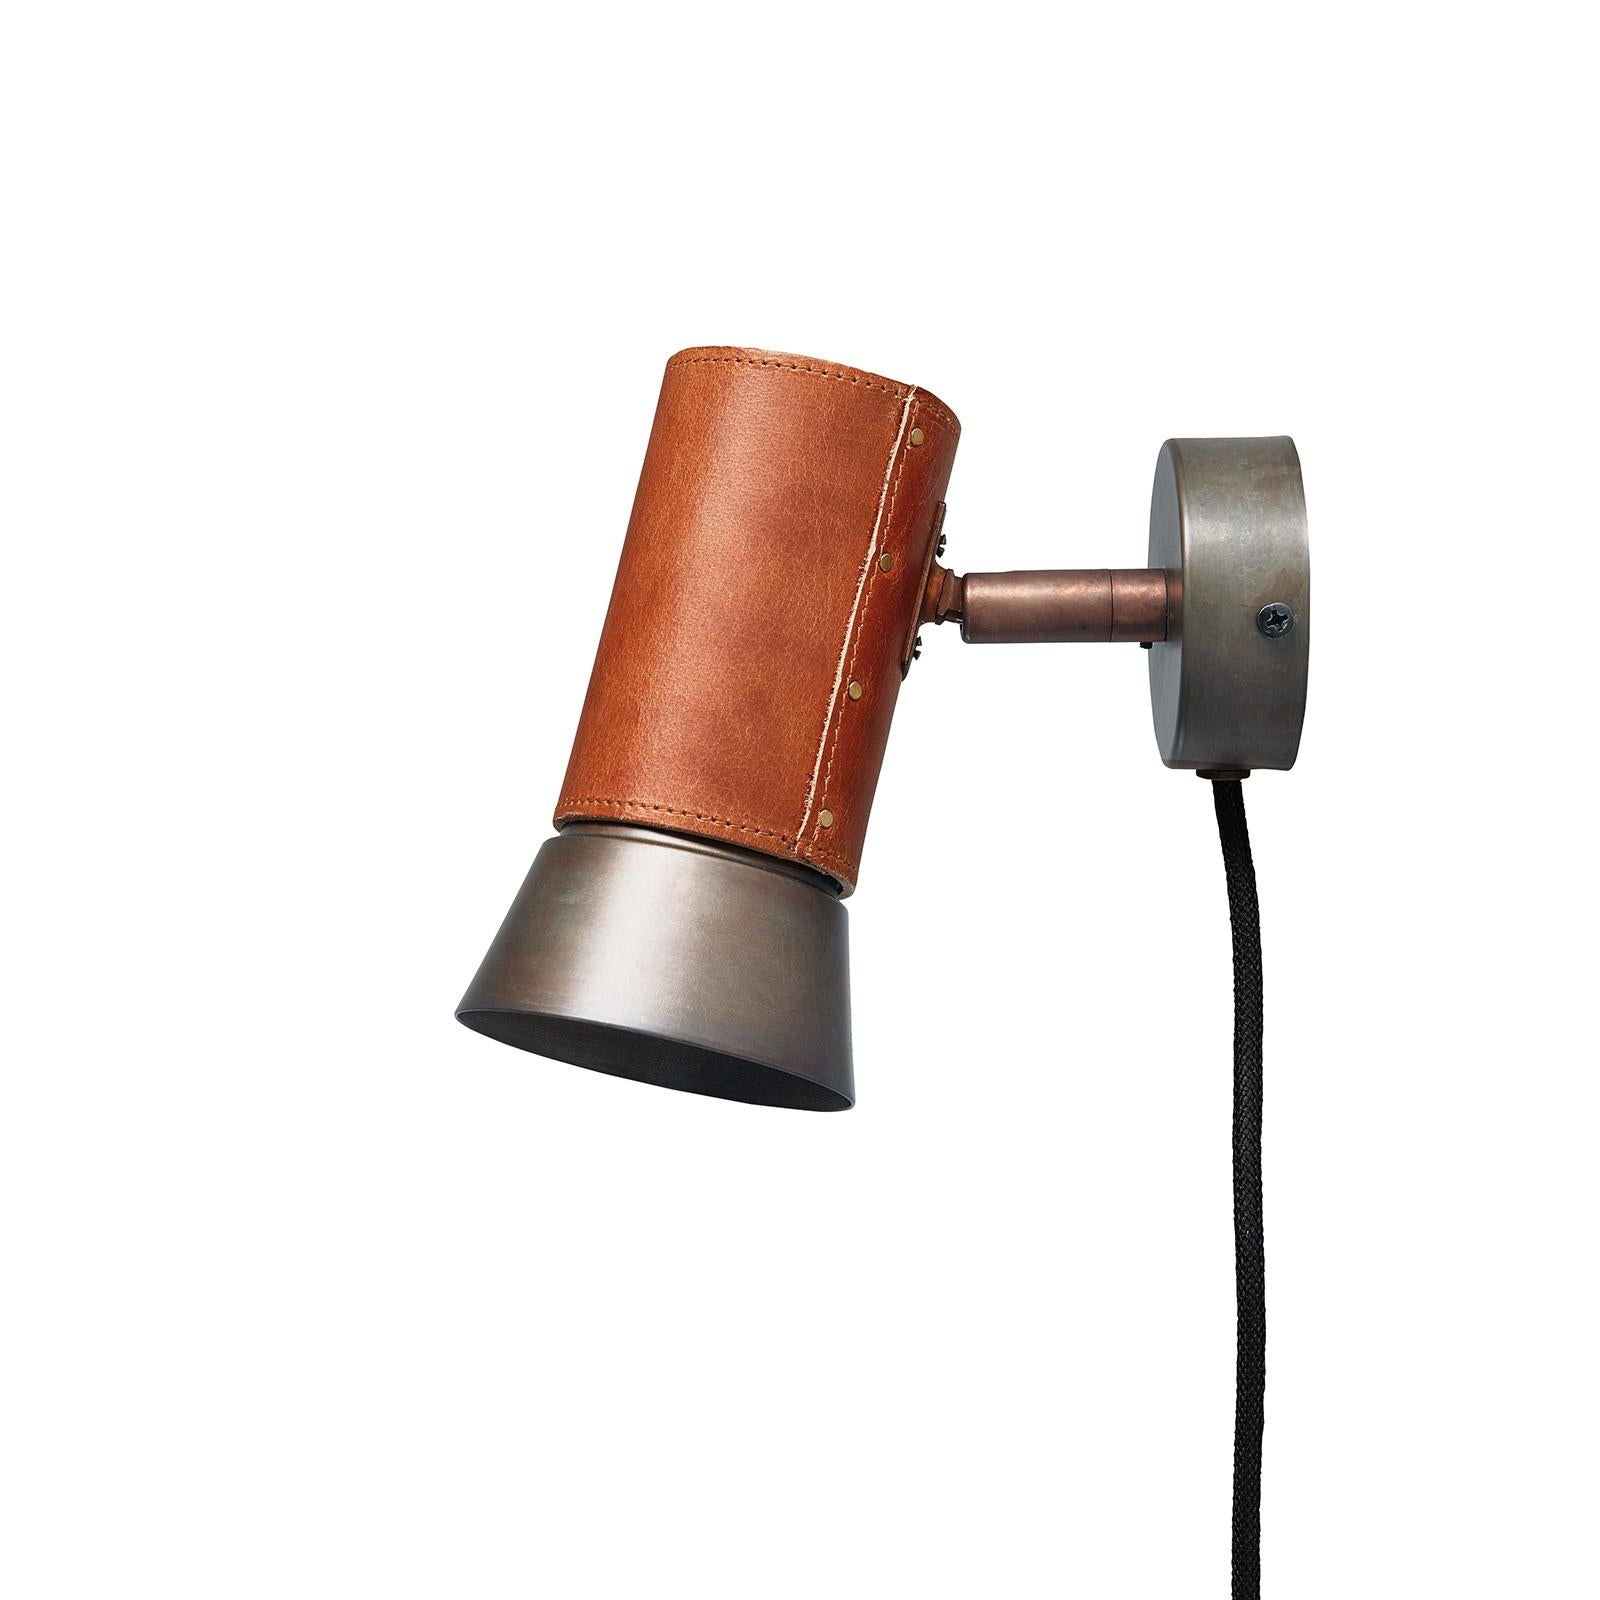 Wall lamp model Kusk designed by Sabina Grubbeson and manufactured by Konsthantverk.

The production of lamps, wall lights and floor lamps are manufactured using craftsman’s techniques with the same materials and techniques as the first